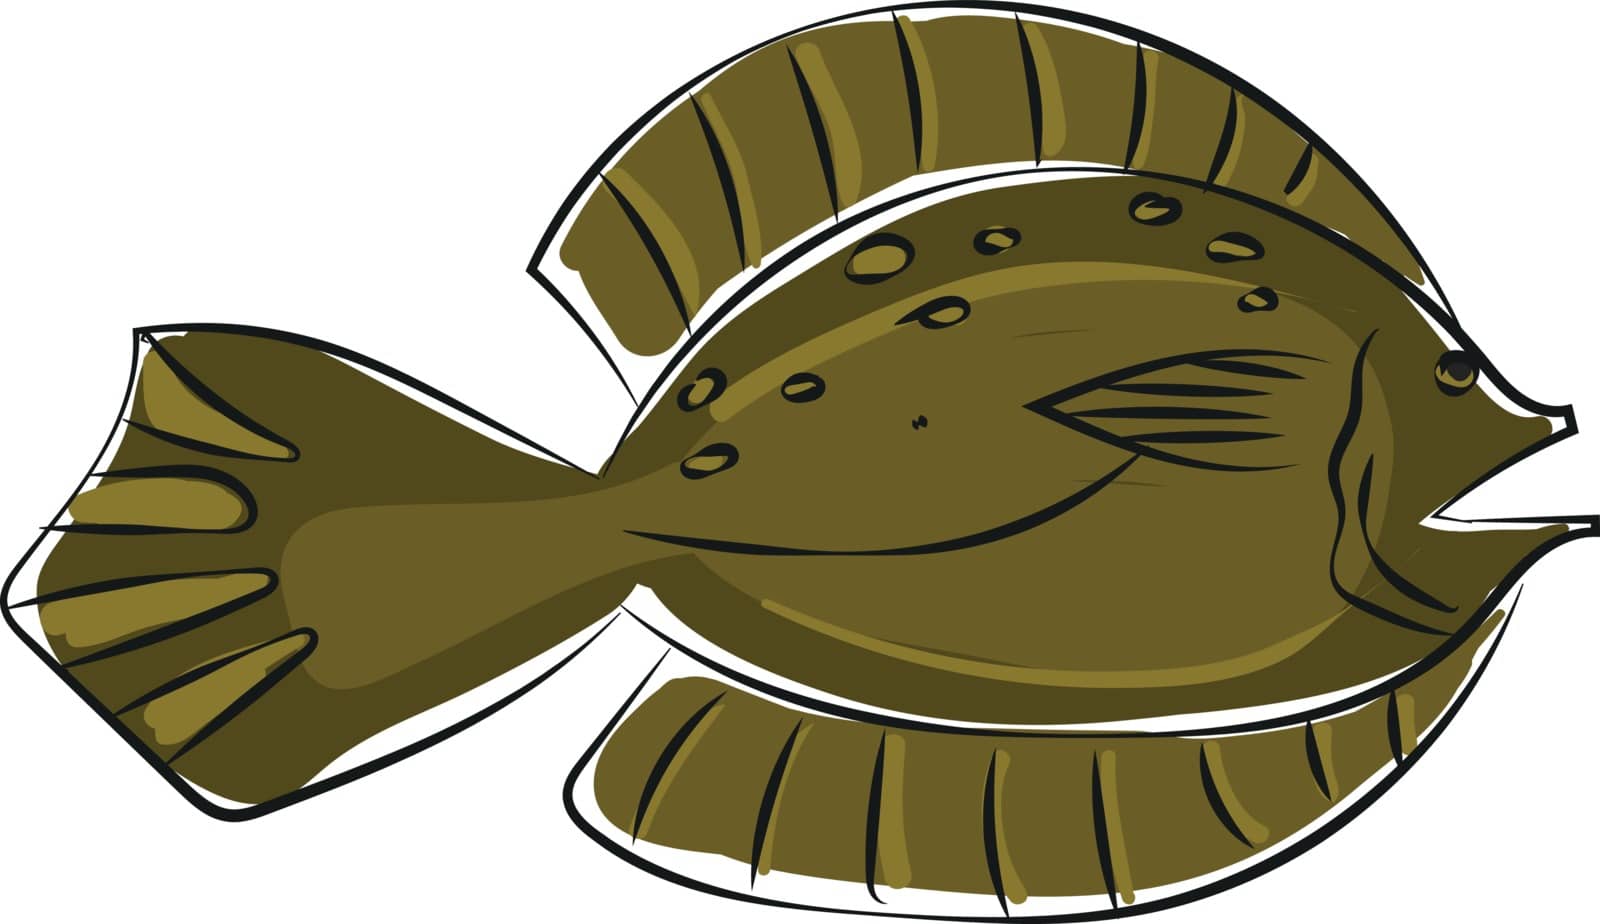 Clipart of a winter flounder fish/Pseudopleuronectes americanus  by Morphart